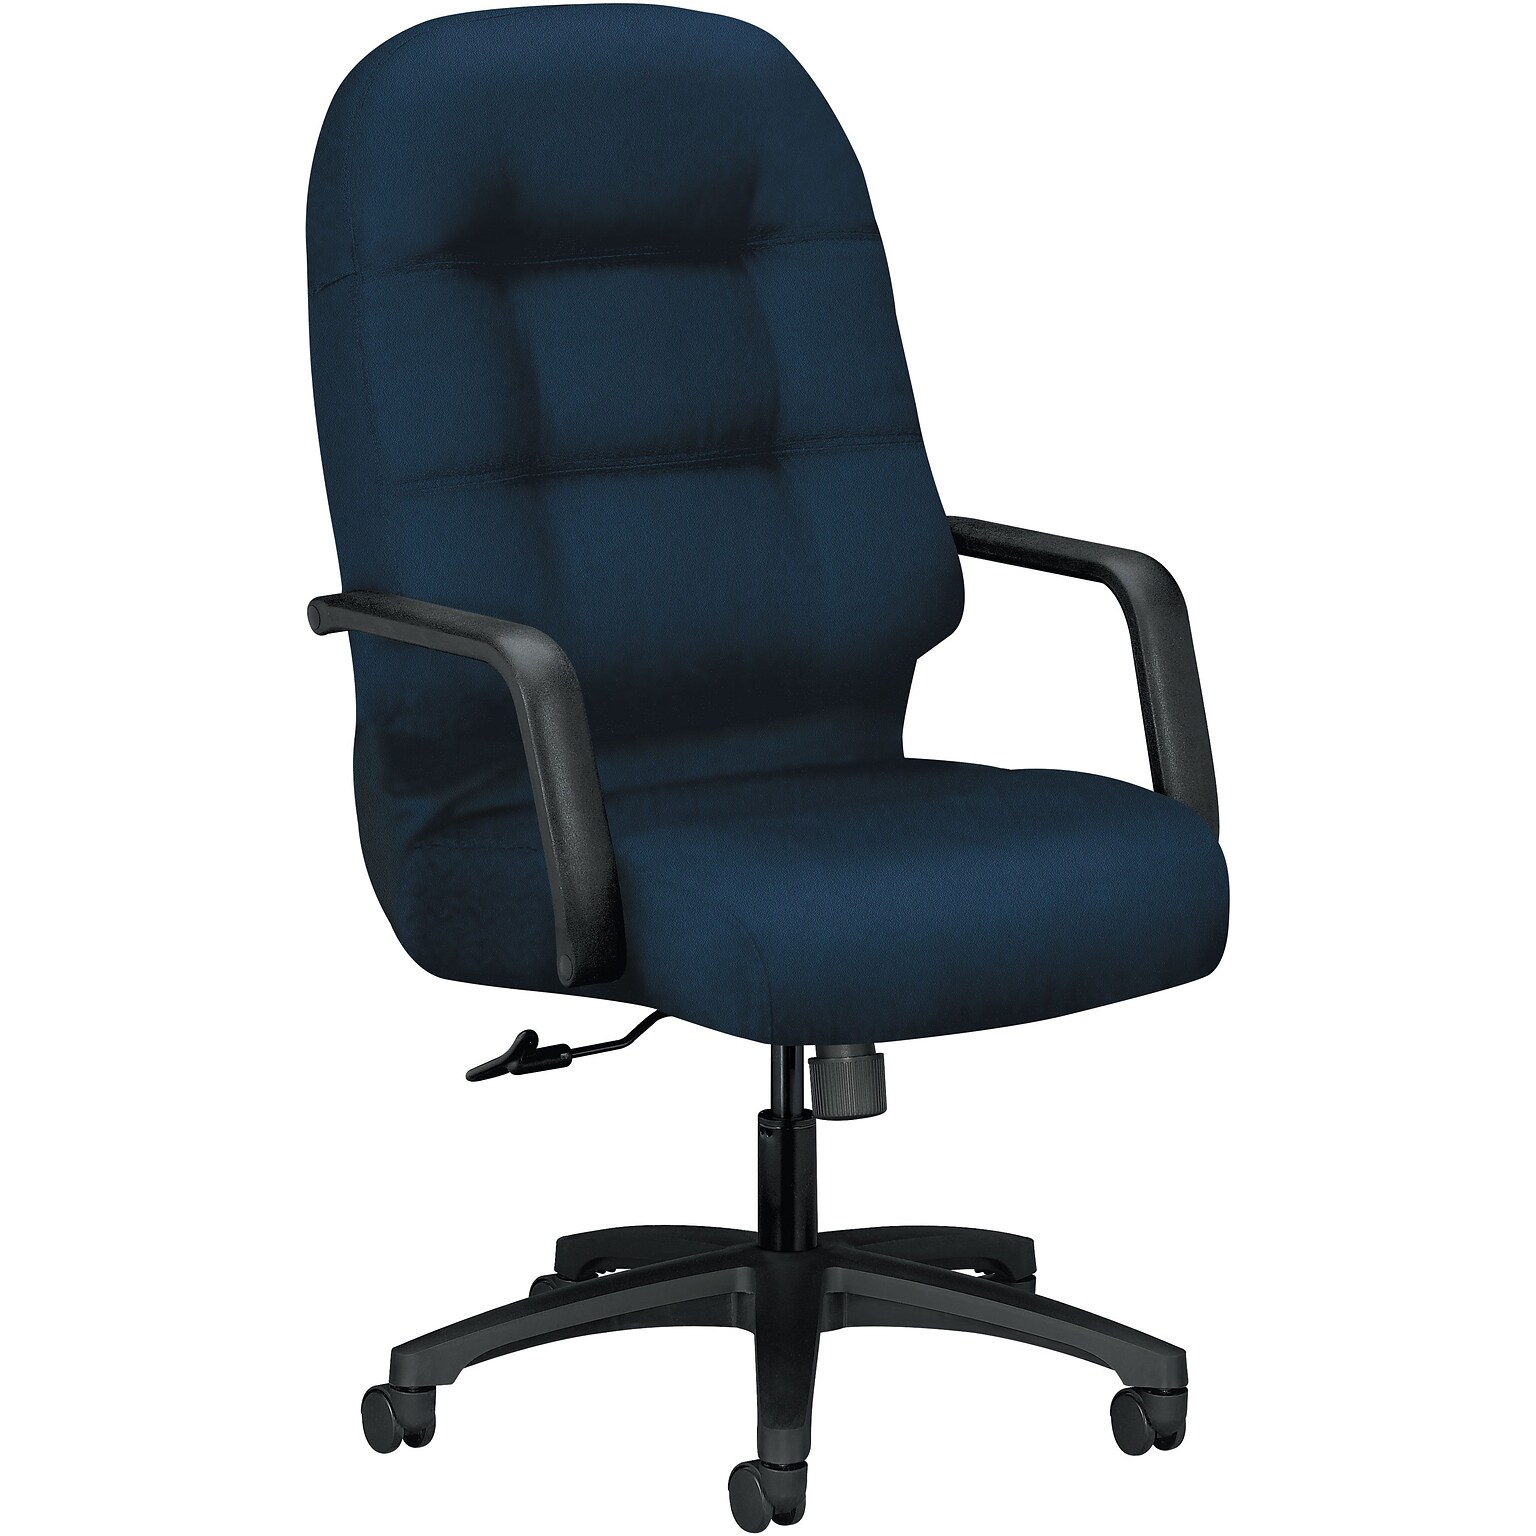 HON Pillow-Soft Fabric High-Back Executive Chair, Navy, Fixed Arms (HON2091CU98T)